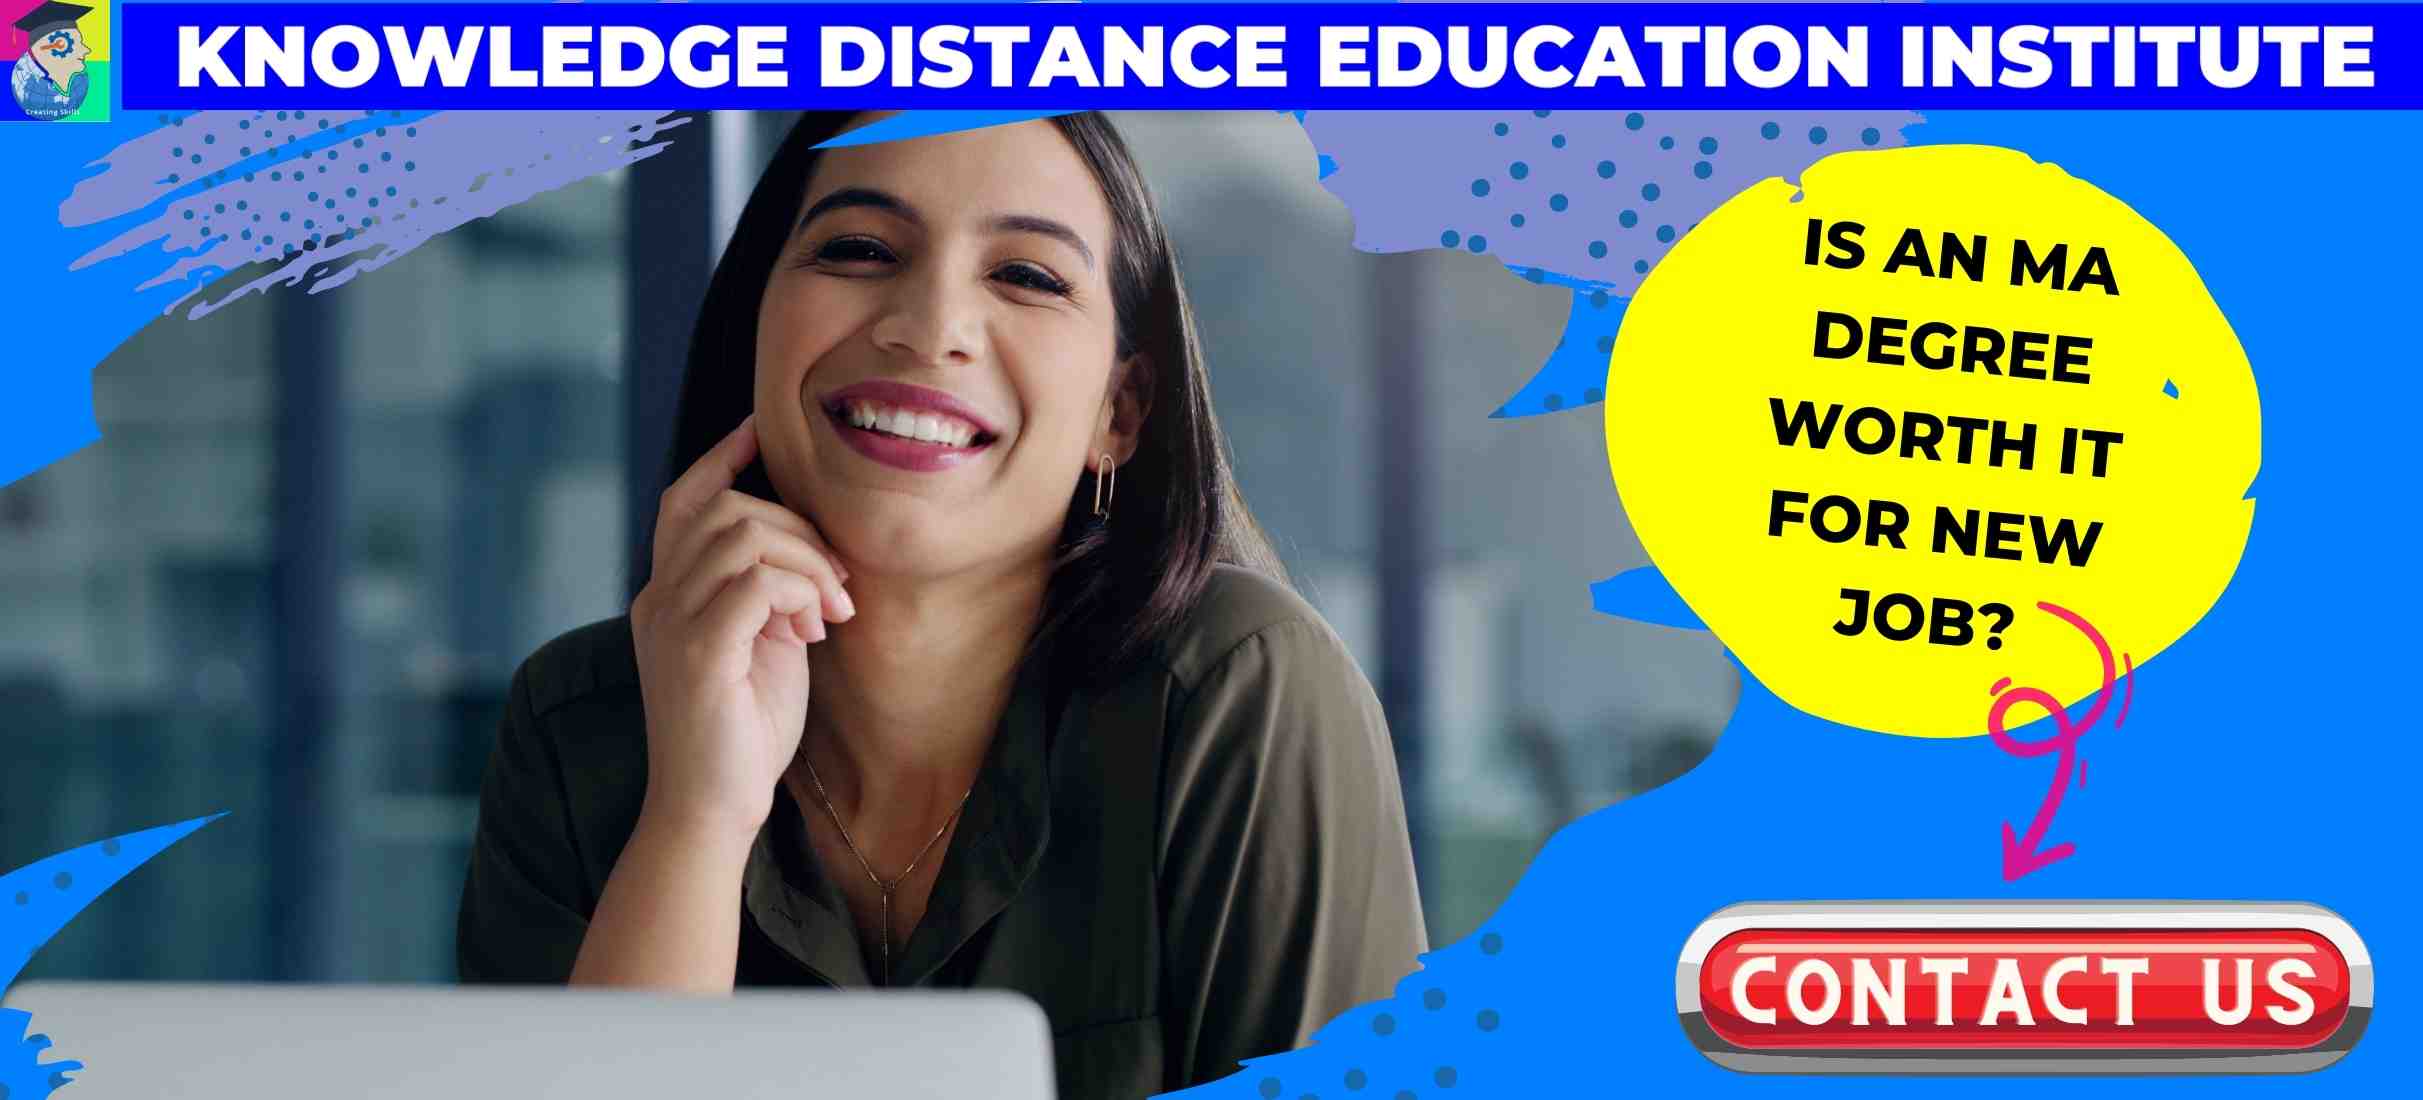 Master of Arts - MA is 2 years degree course, offered in Distance, Online, Private, or  Regular Learning modes by UGC recognized Universities in India.  For career guidance you may contact Knowedge Distance Education Institute on +91 9029020524